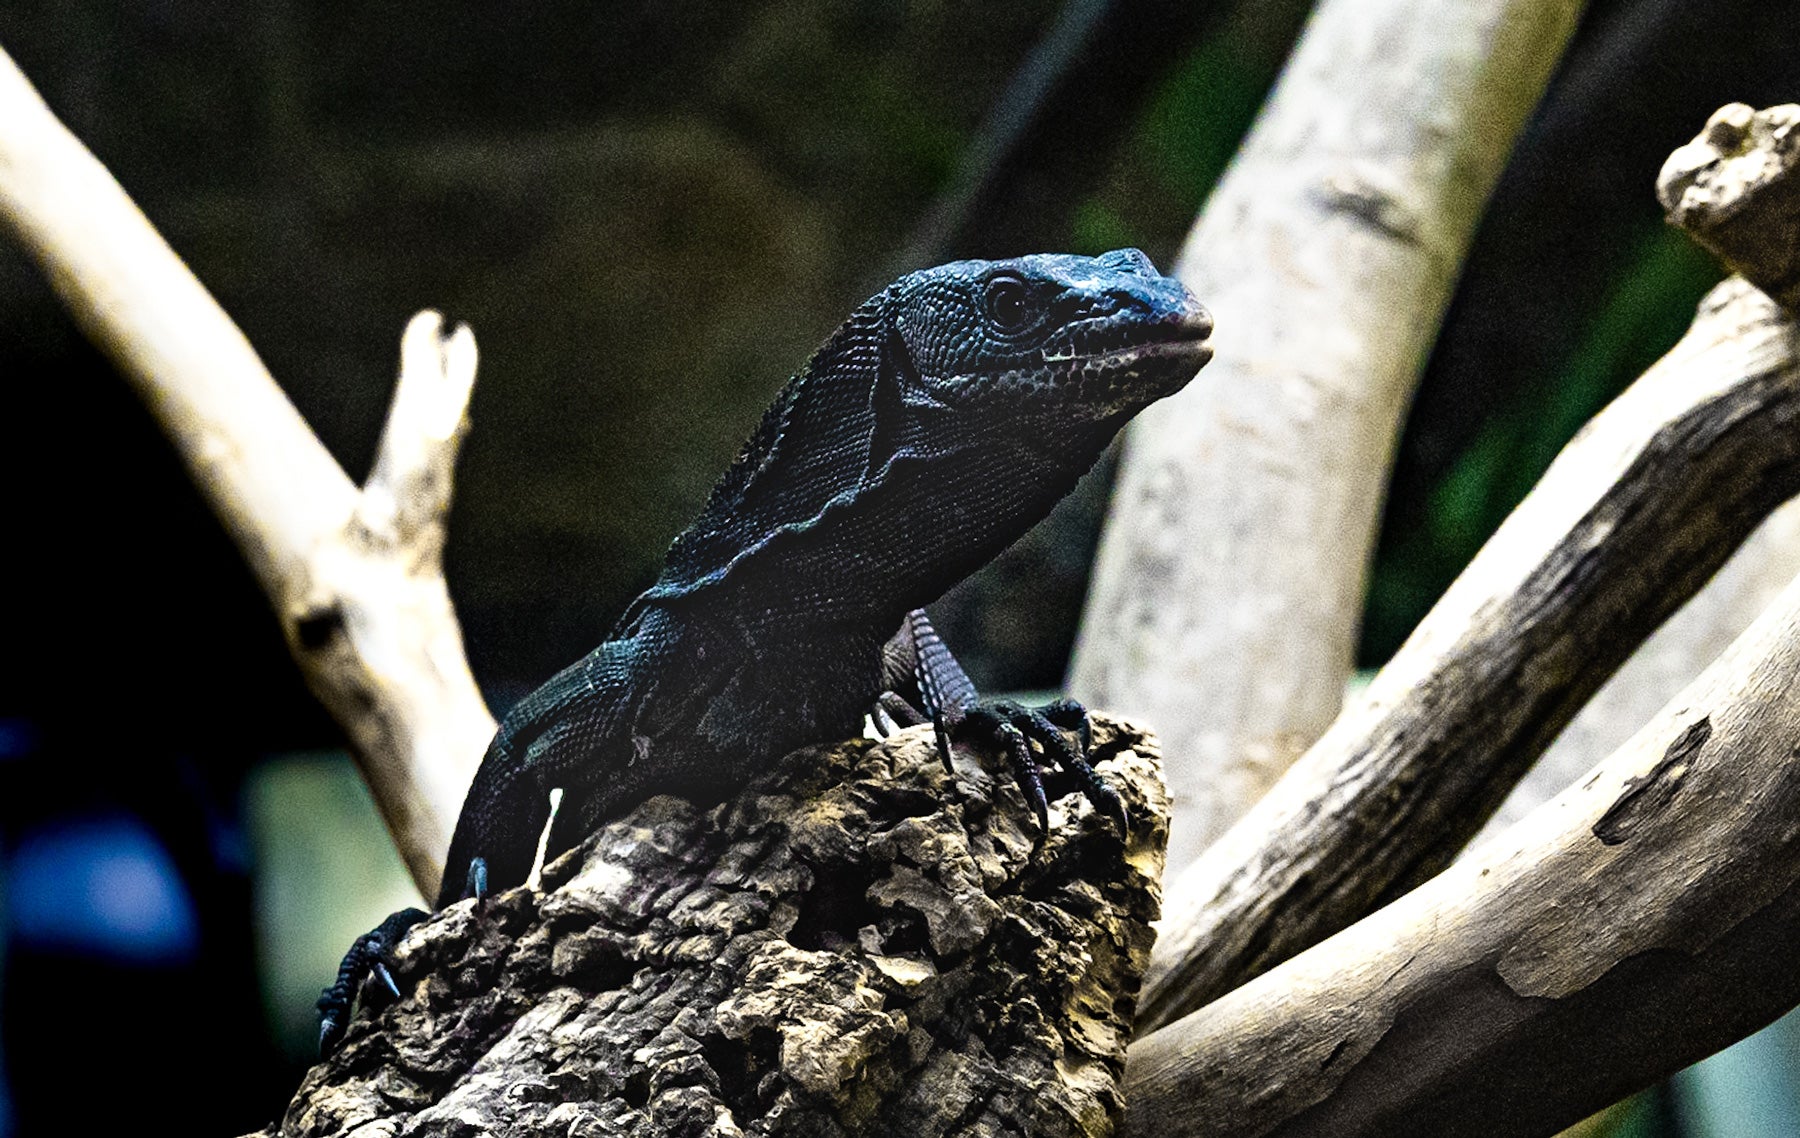 A black tree monitor (lizard) with a slender body and dark coloration climbs over a tree branch